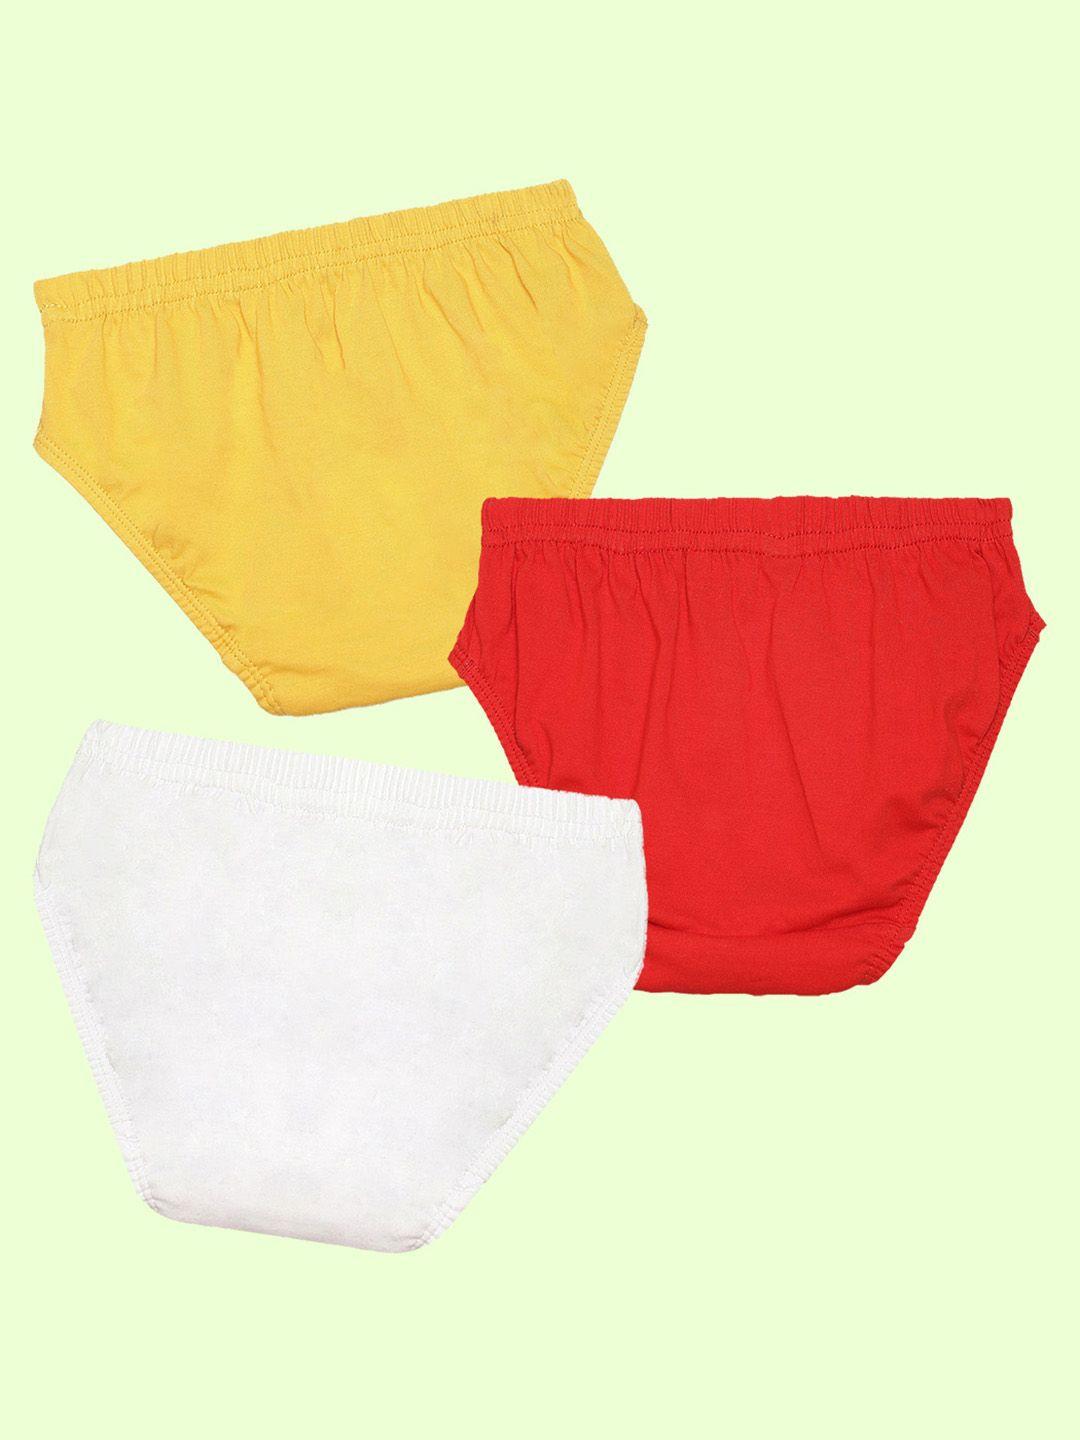 nusyl boys pack of 3 pure cotton basic briefs